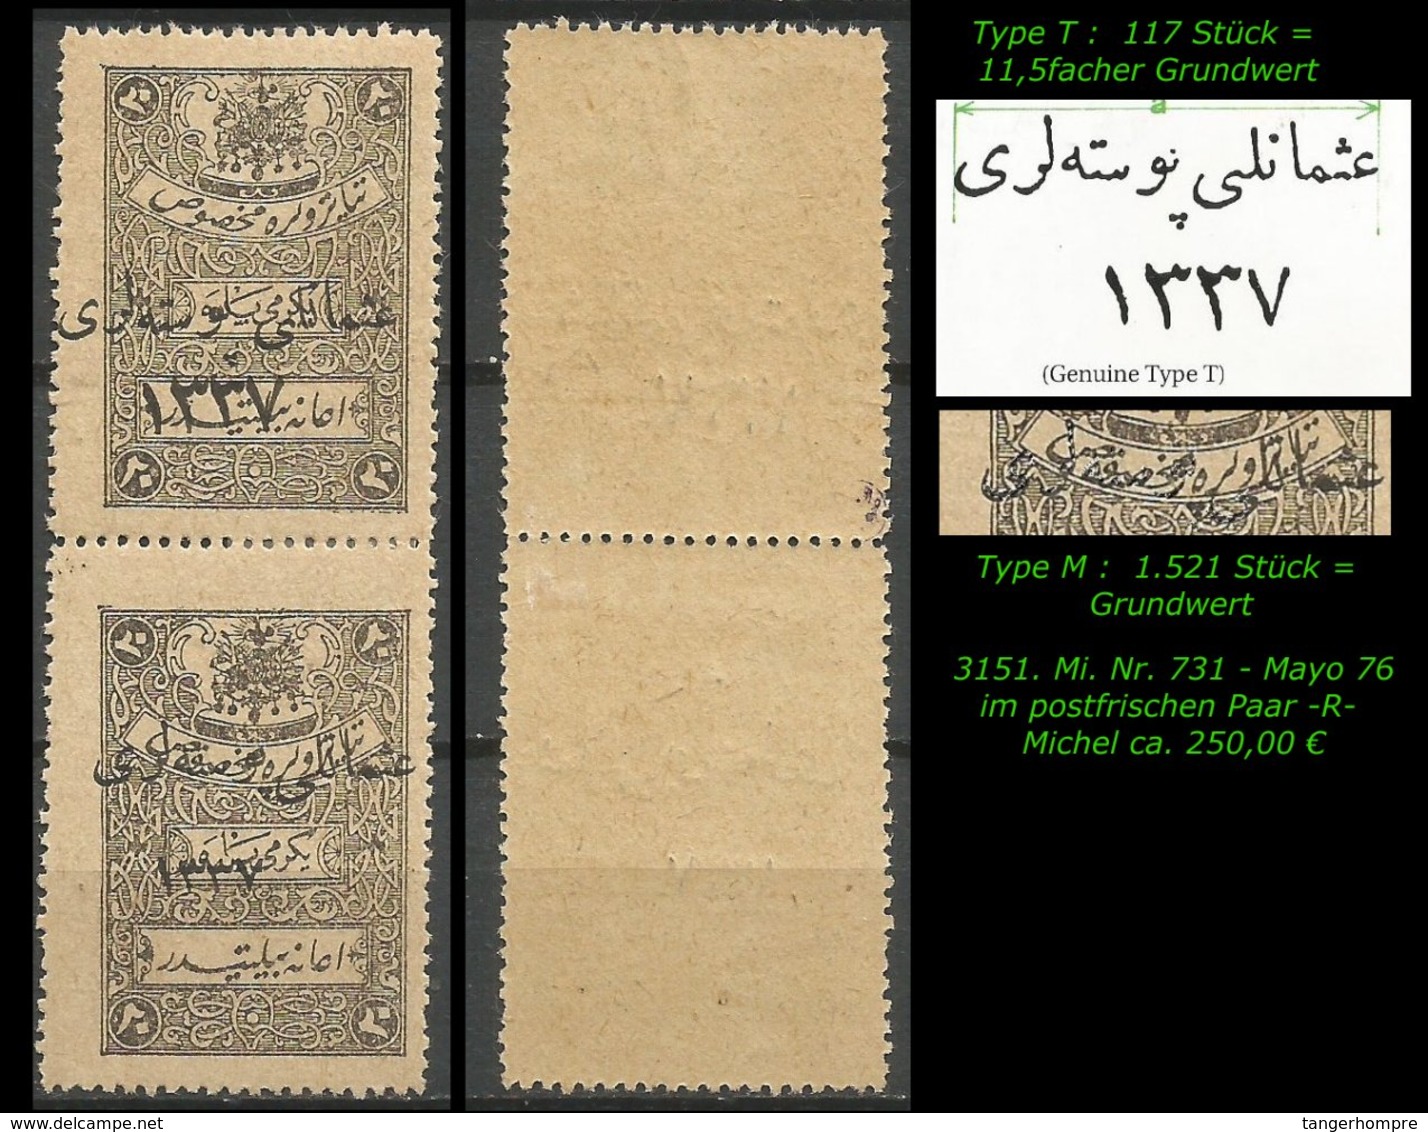 EARLY OTTOMAN SPECIALIZED FOR SPECIALIST, SEE...Mi. Nr. 731 - Mayo 76 M + T -RRR- In Postfrisch - Ongebruikt